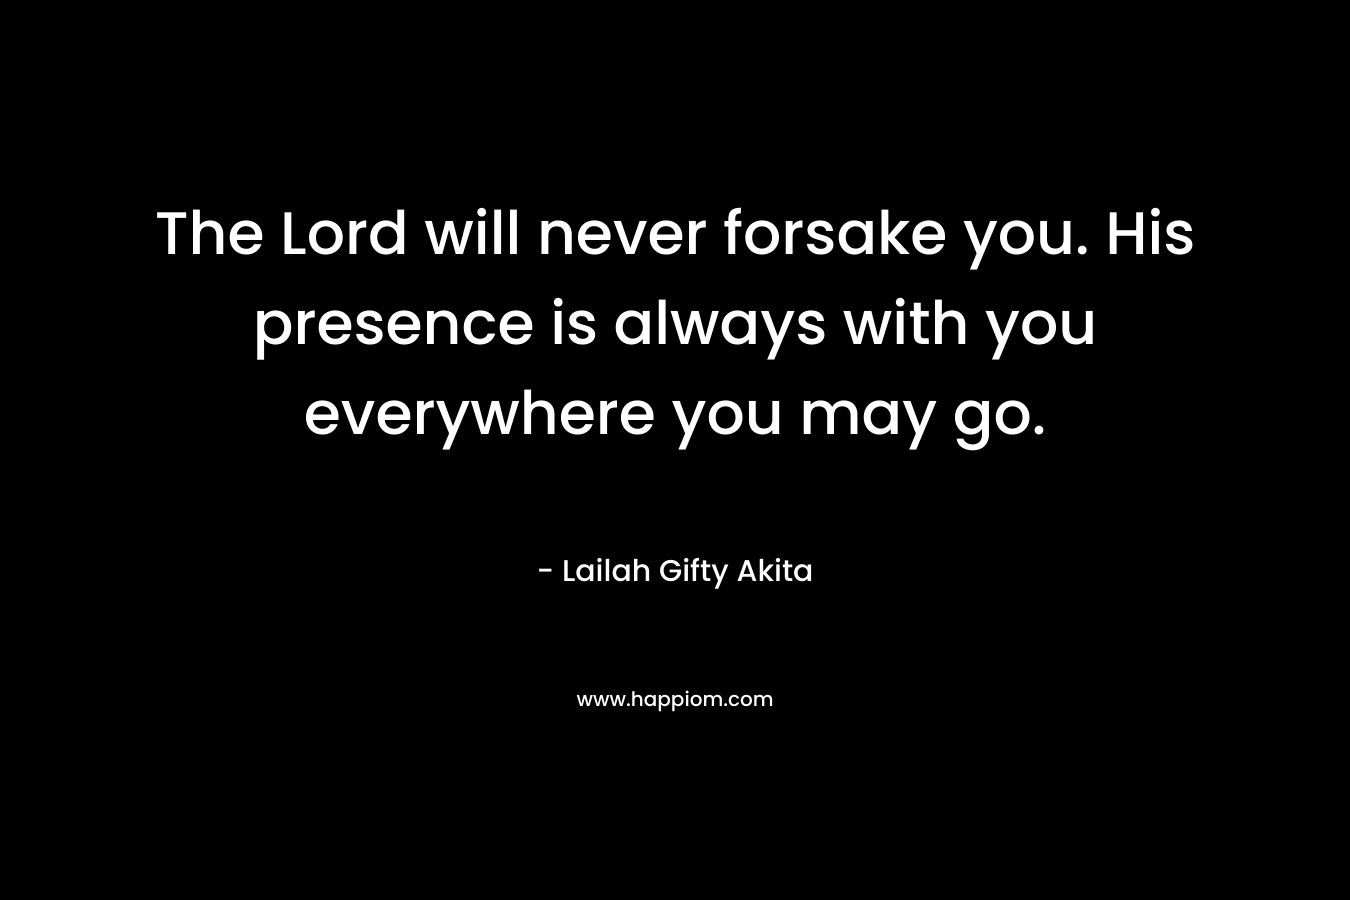 The Lord will never forsake you. His presence is always with you everywhere you may go.